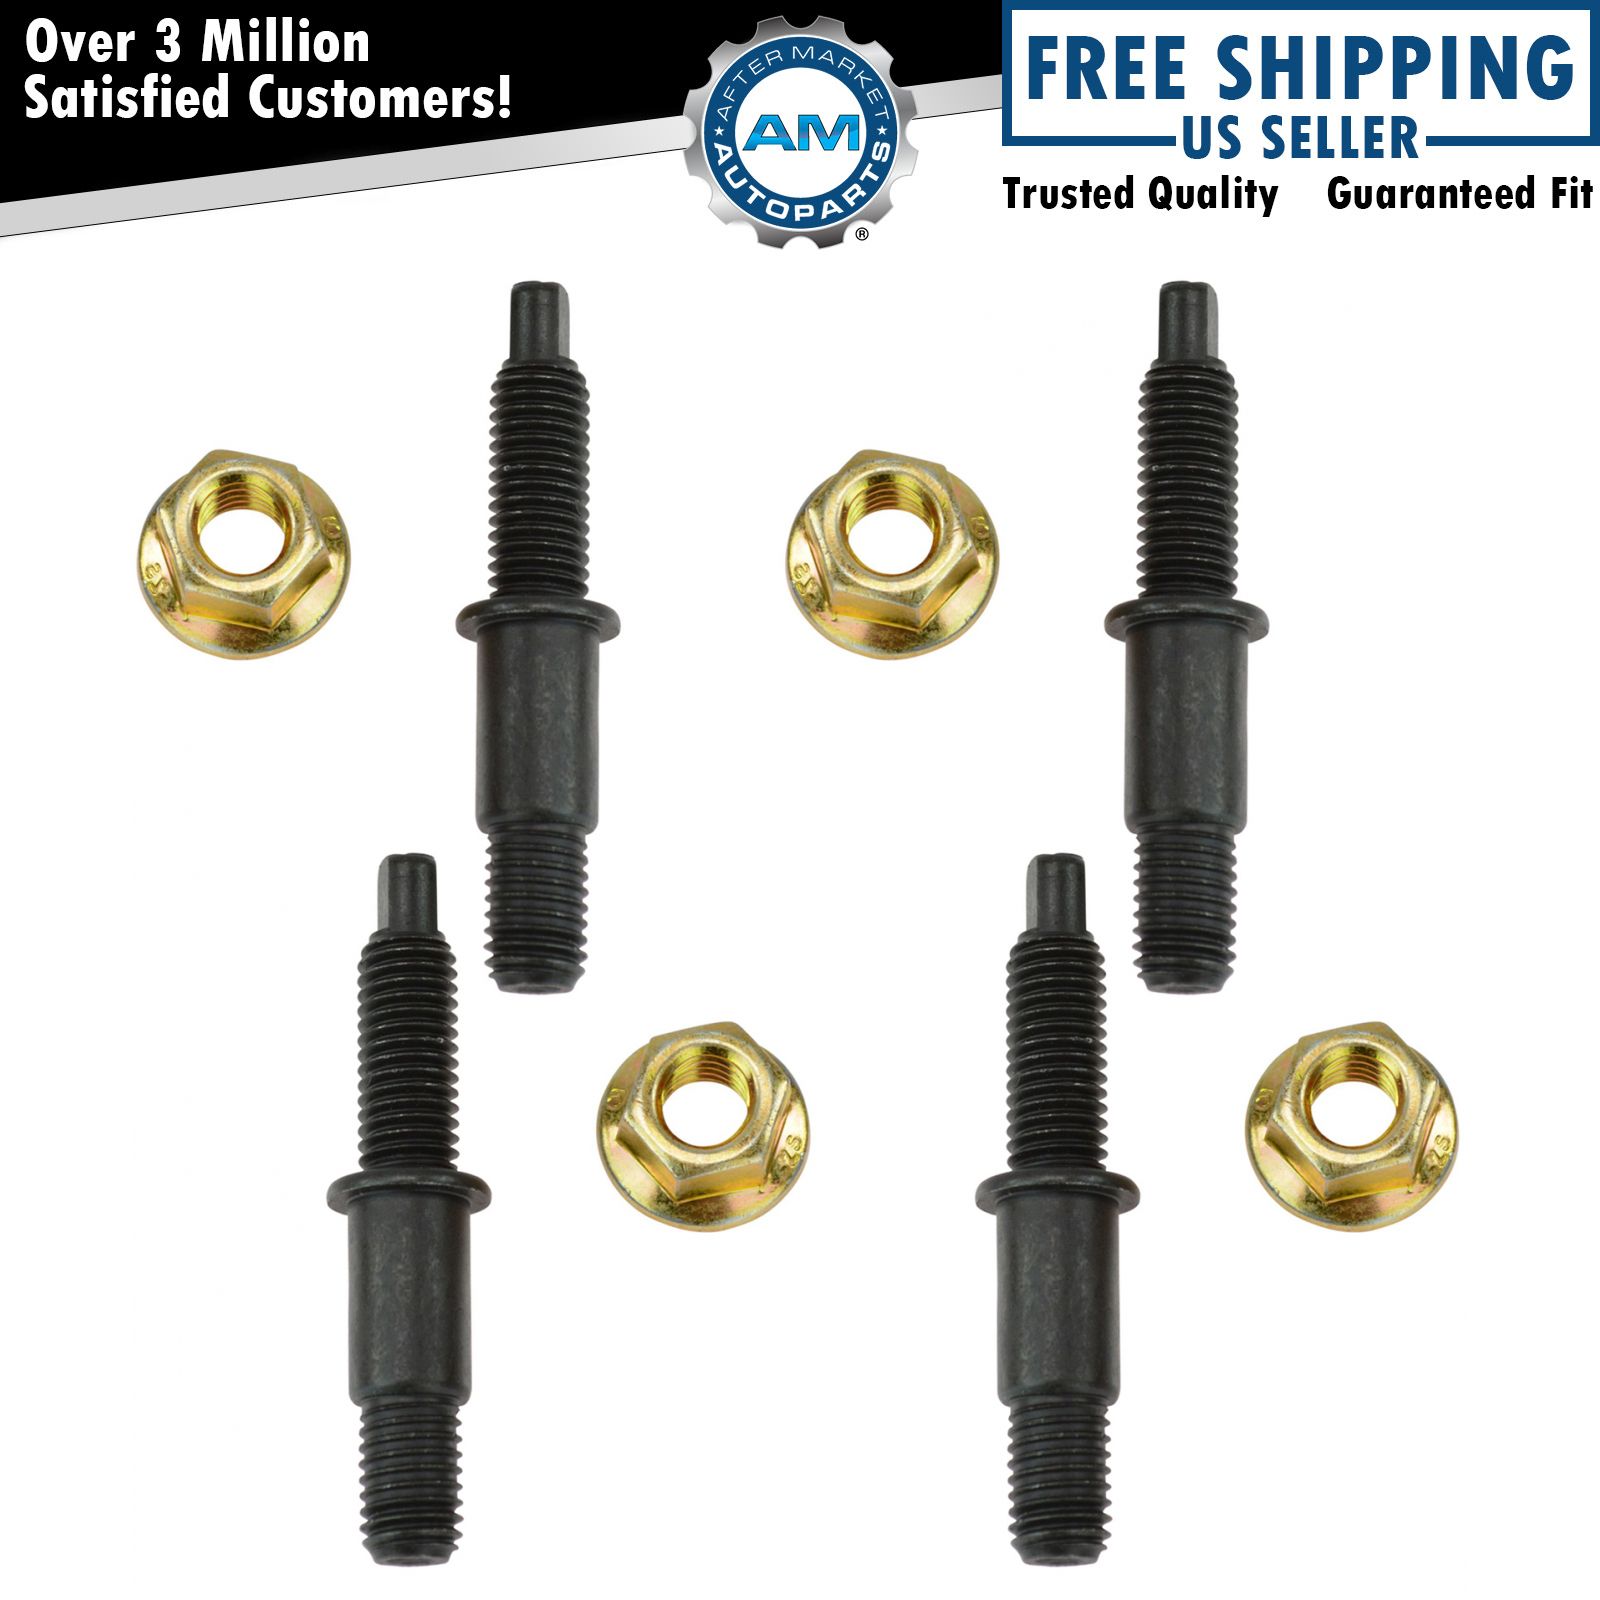 Dorman 03117 Exhaust Manifold Flange Stud & Nut Set of 4 for Ford Lincoln